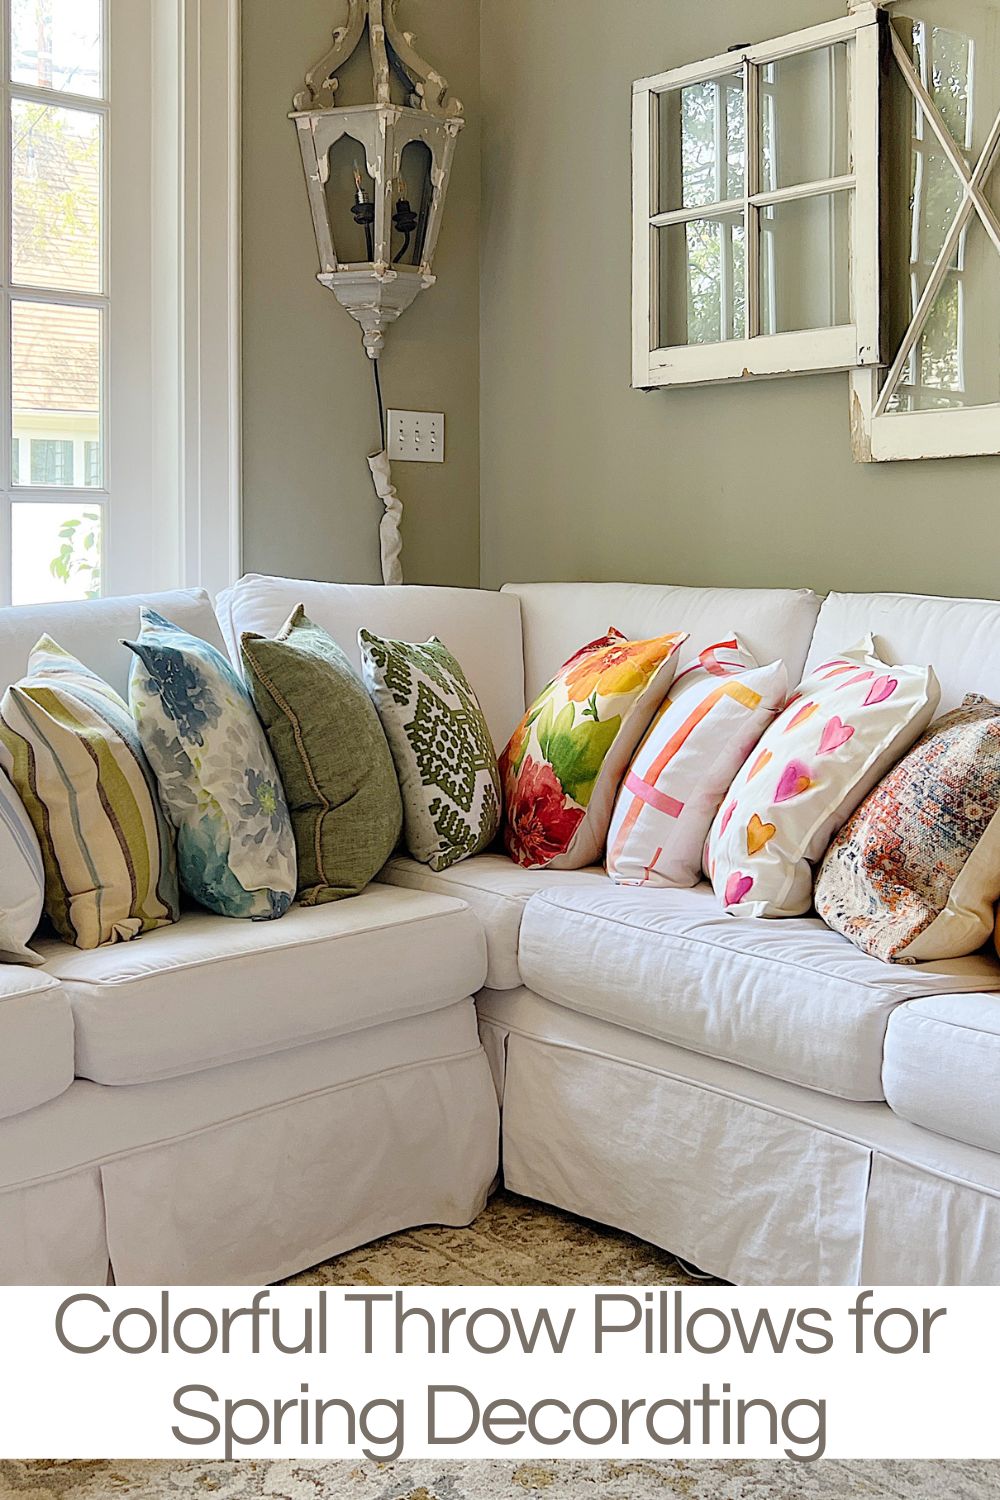 Spring is the season to refresh and add a splash of color to your home decor. One way to do this is with colorful throw pillows.